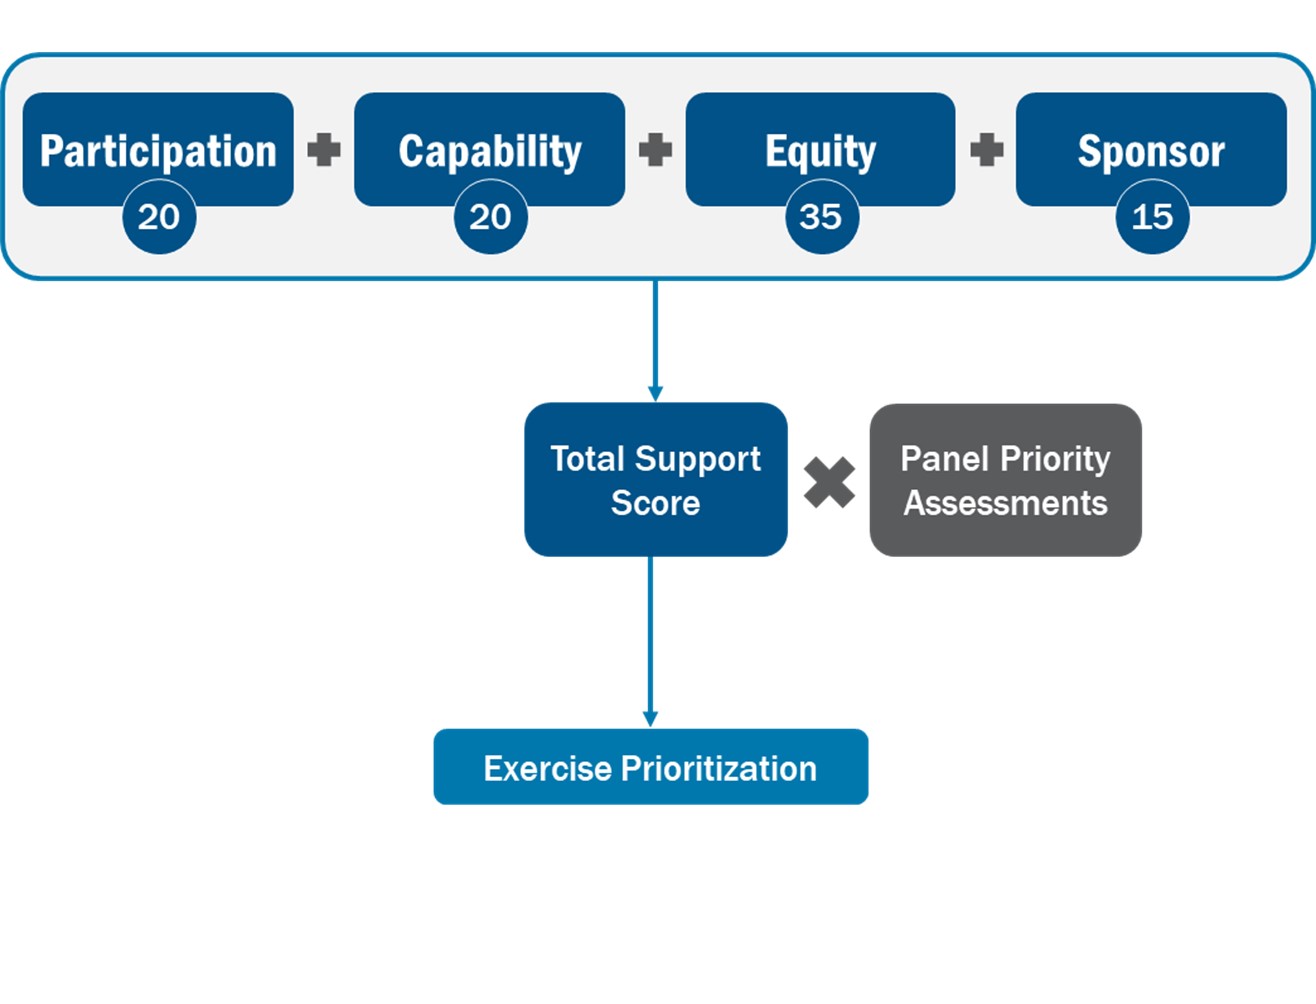 This graphic shows the Exercise Support Request Submission Review and Rating Process. Exercise Support Requests will be scored out of a total of 100 points with participation and capability each scored out of 20 points. Equity counts for 35 points maximum and Sponsors out of 15 points. The Total Support Score and Panel Priority Assessments are combined to inform Exercise Prioritization.